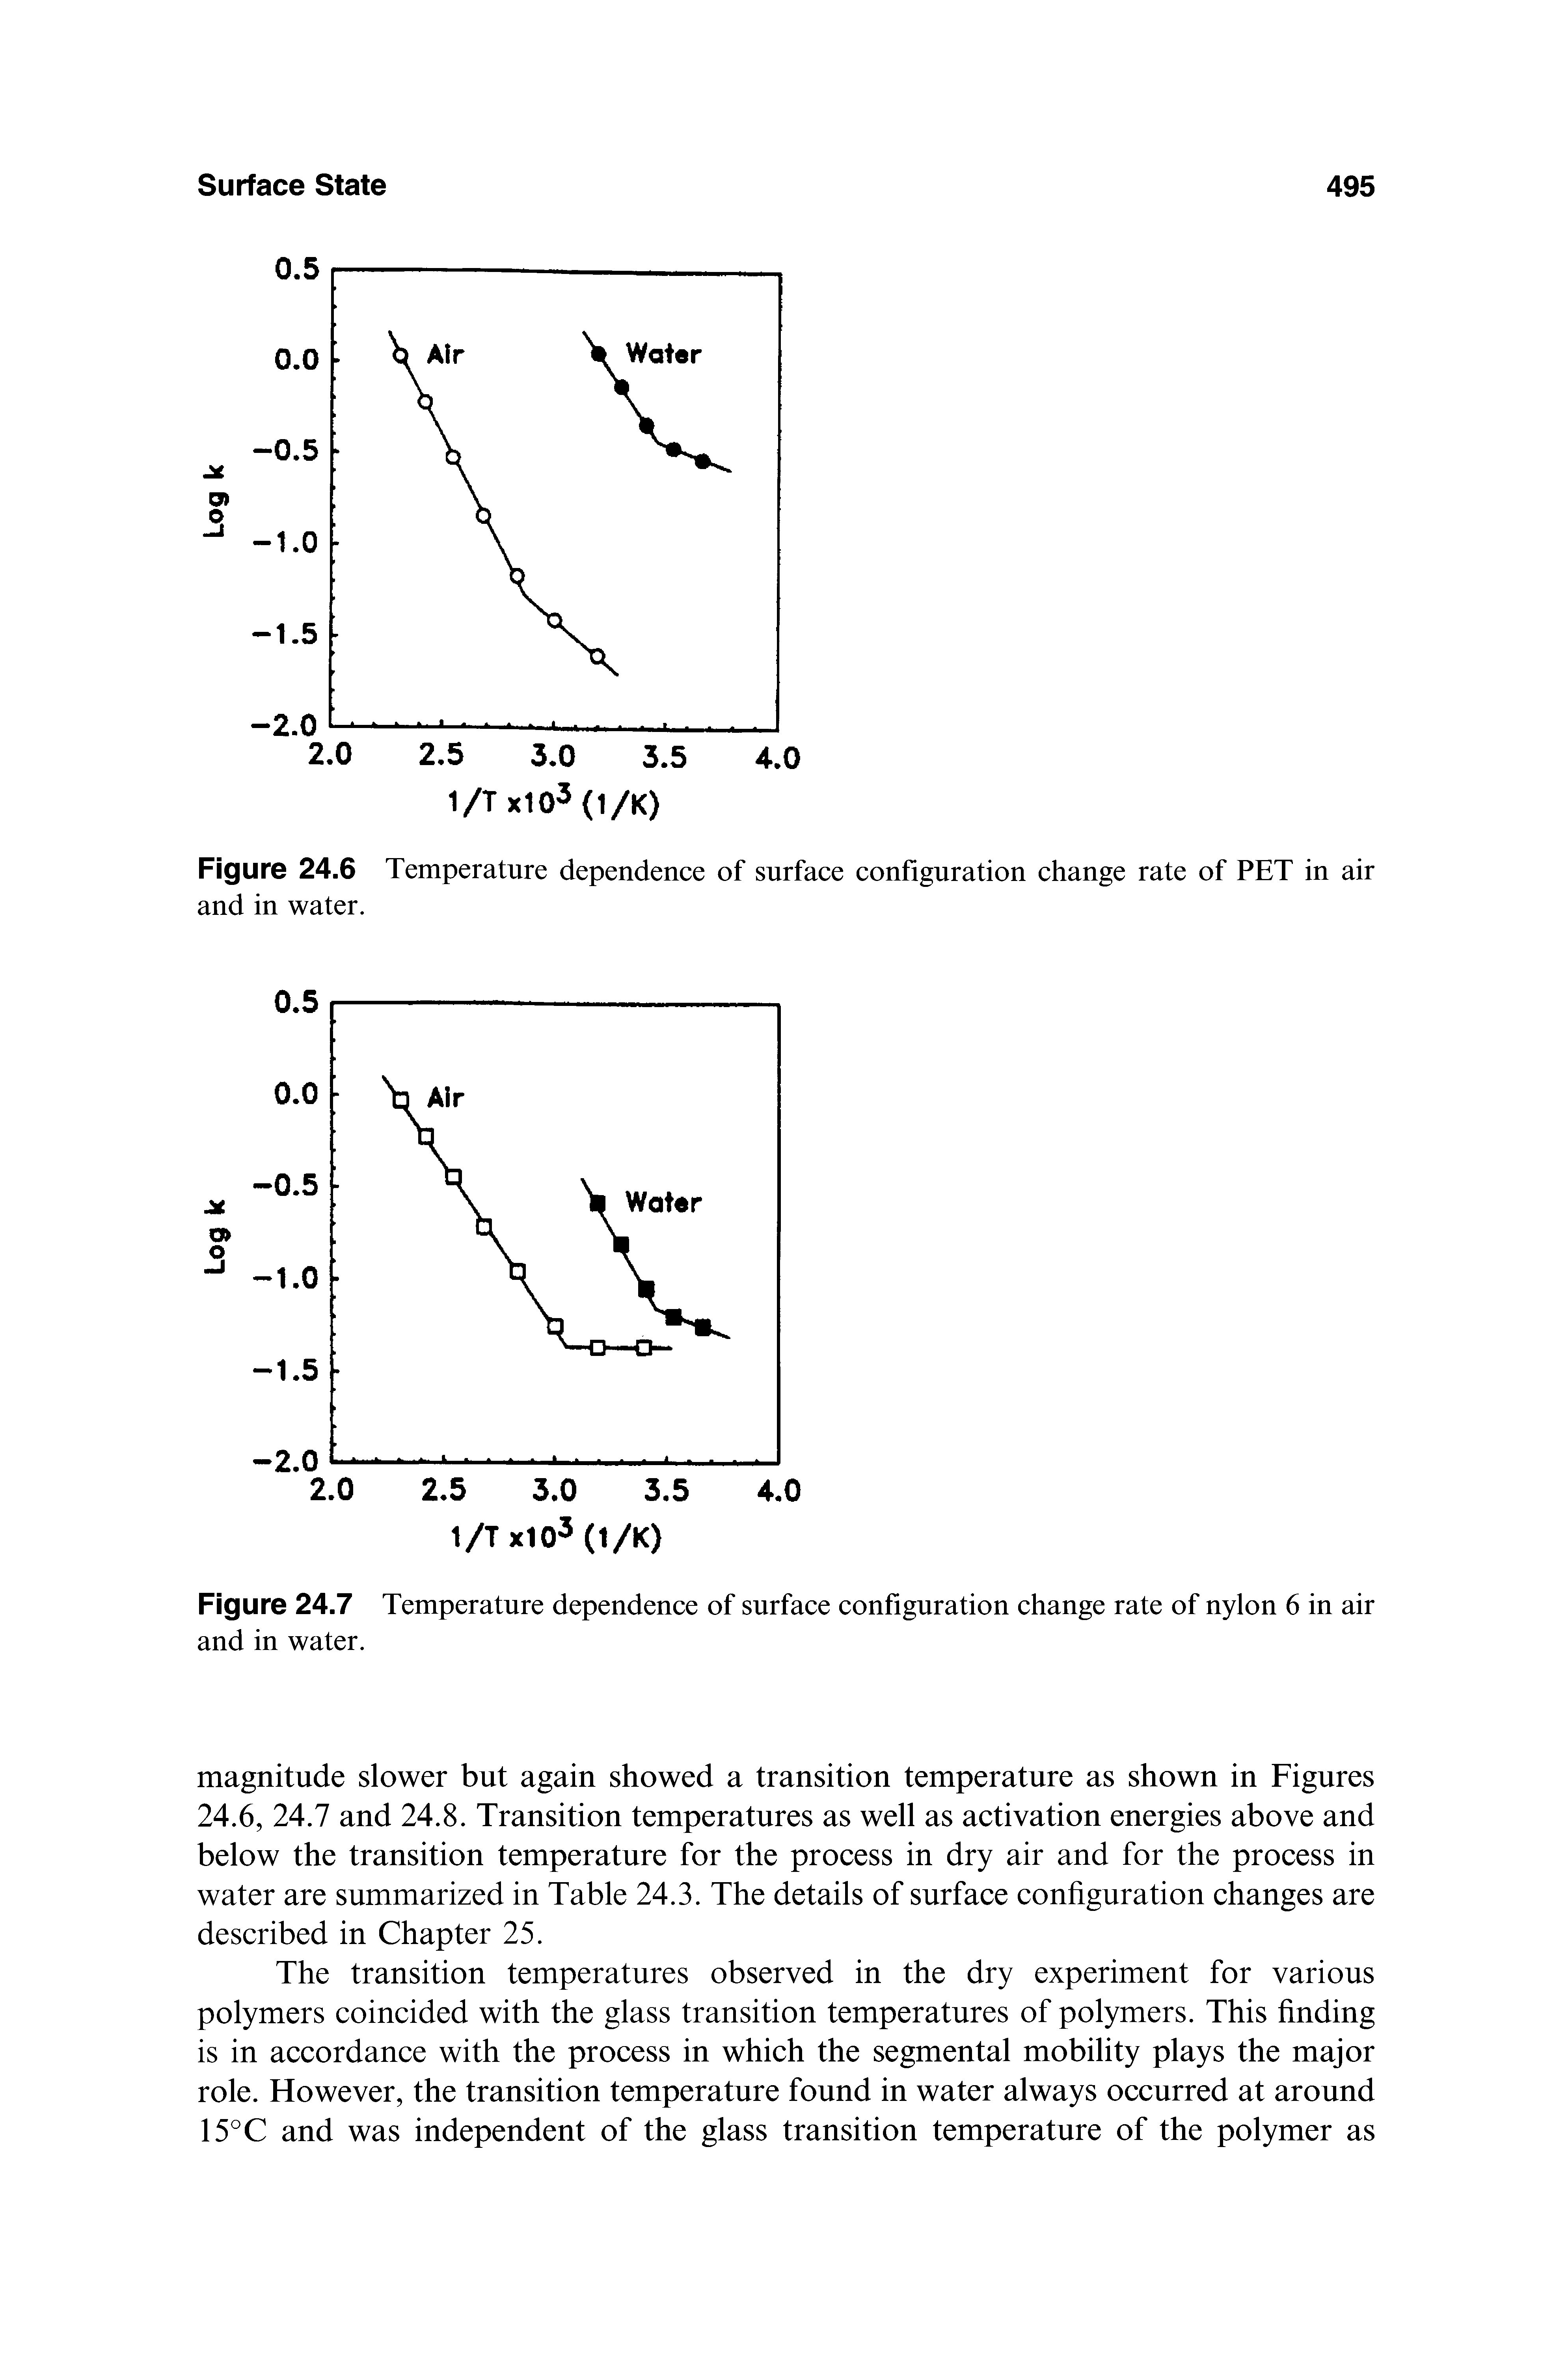 Figure 24.6 Temperature dependence of surface configuration change rate of PET in air and in water.